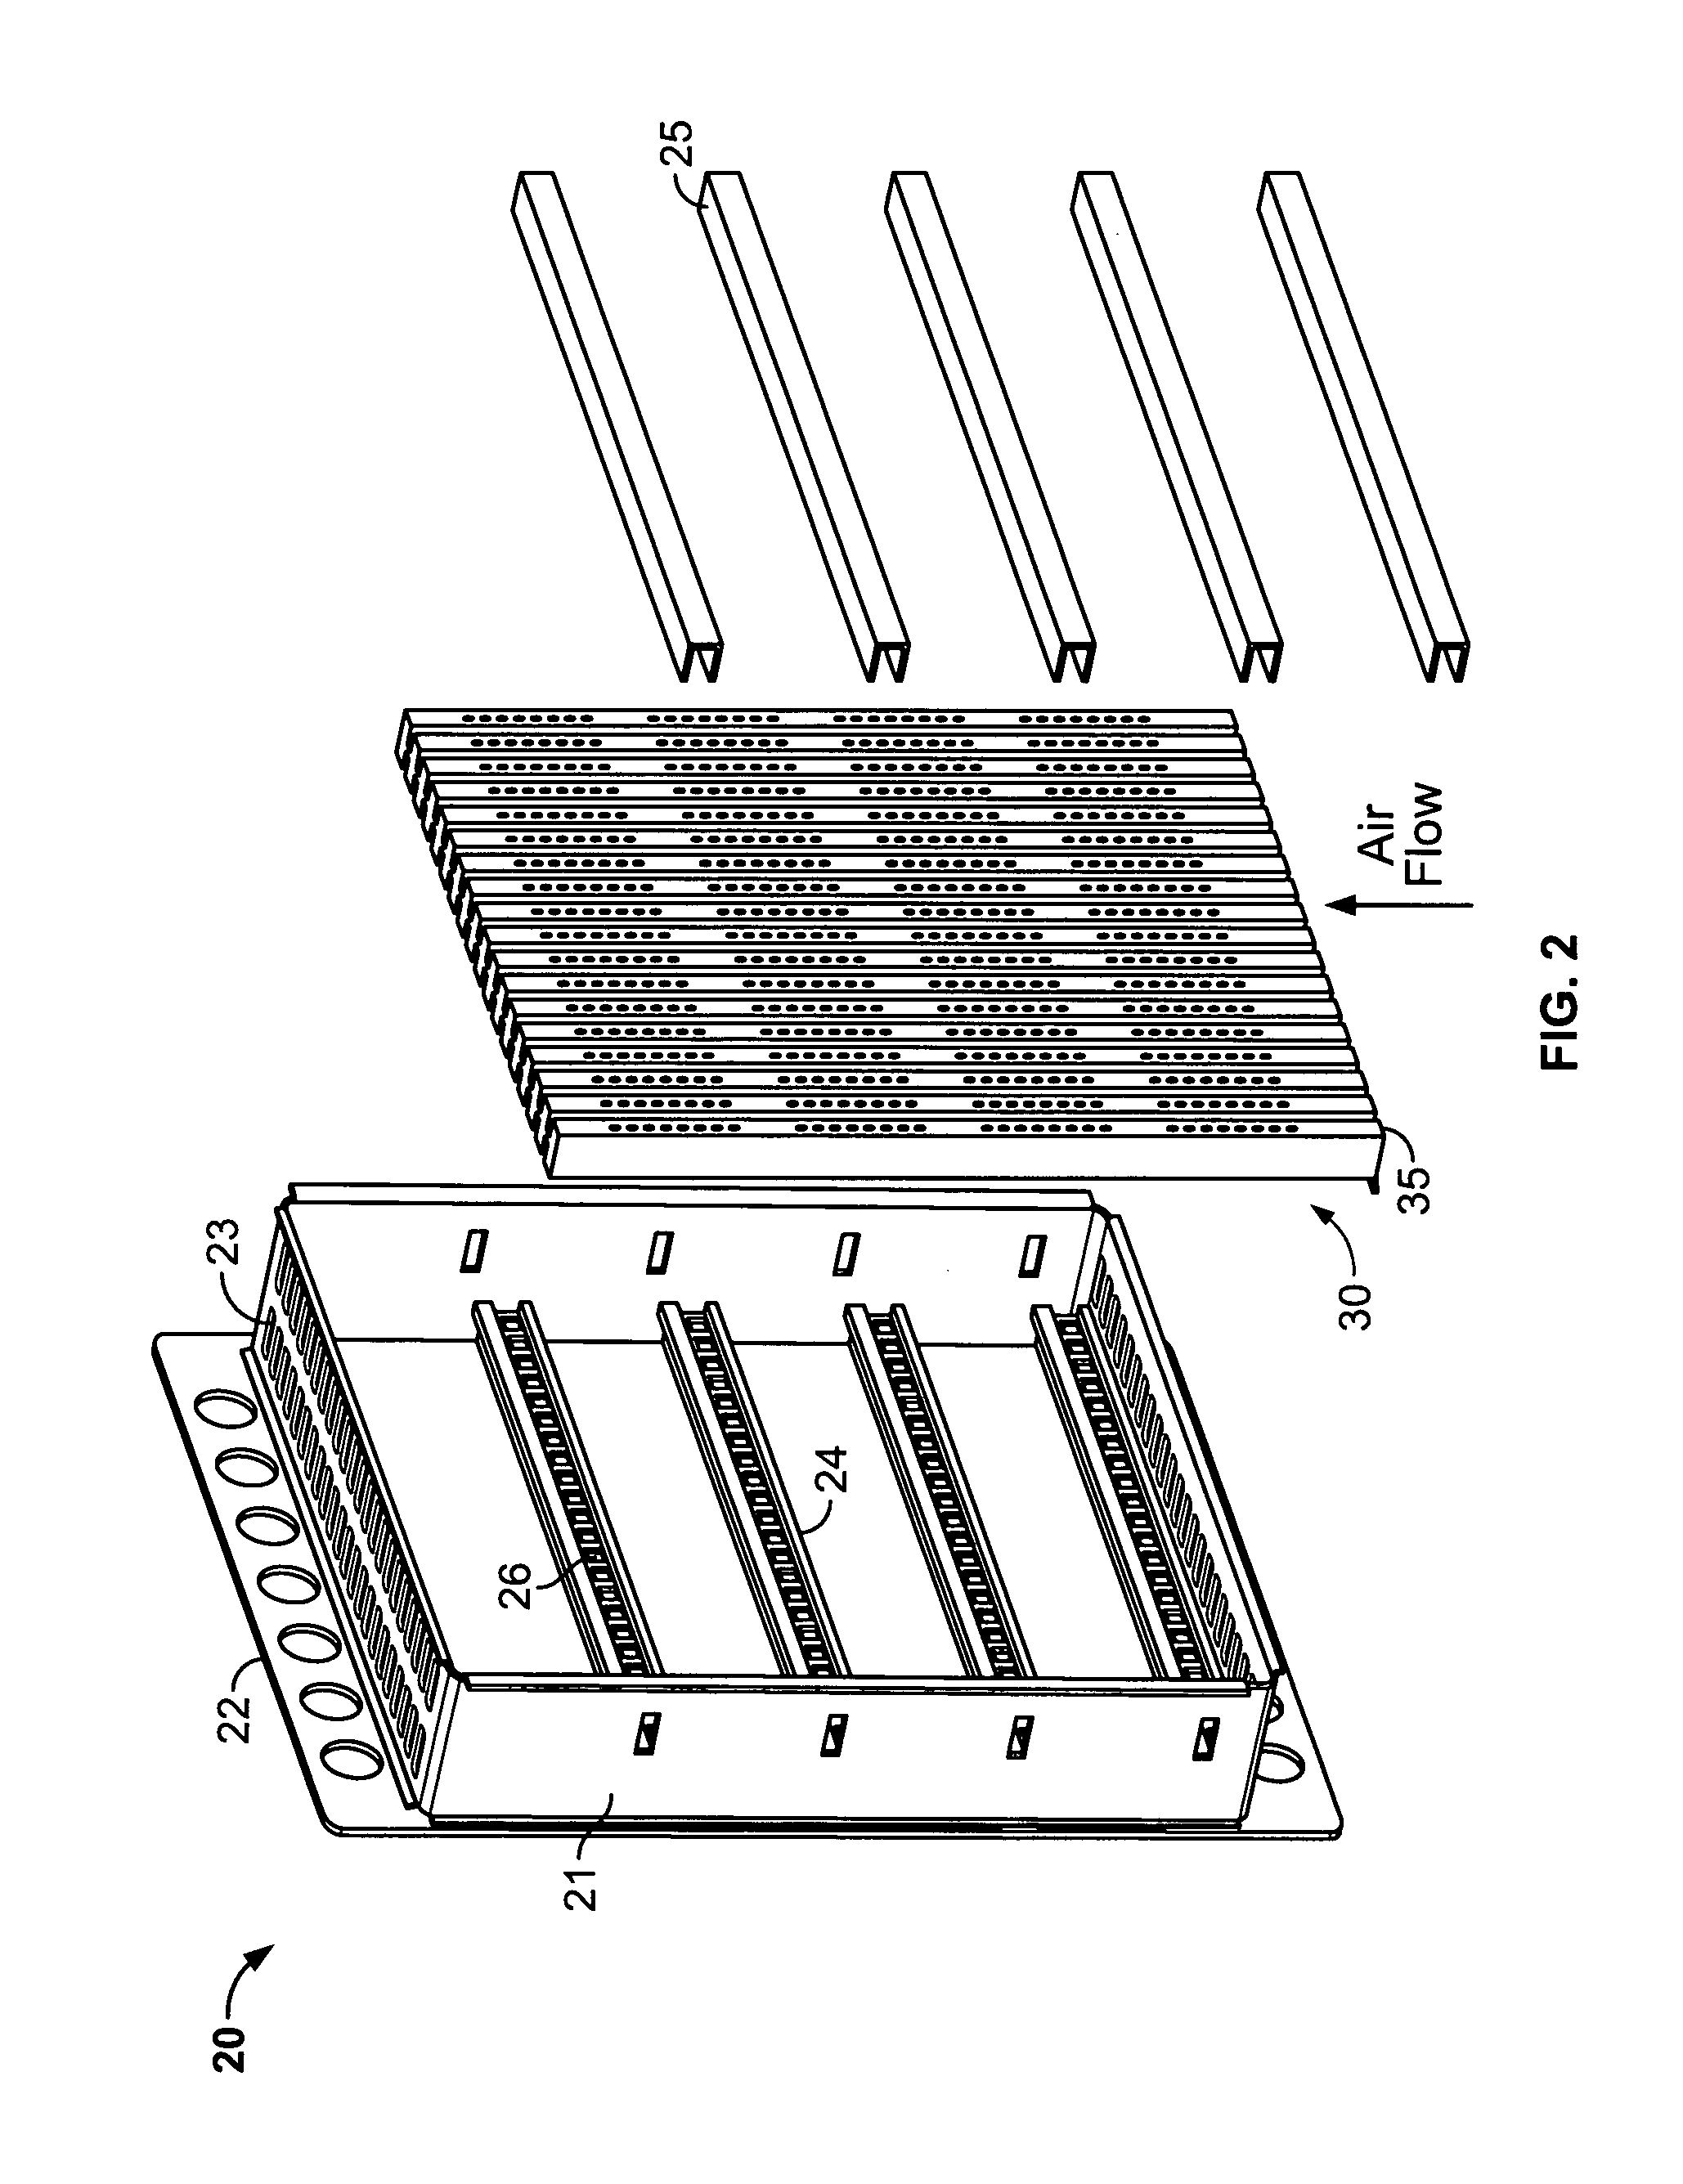 Integrated electronic structure